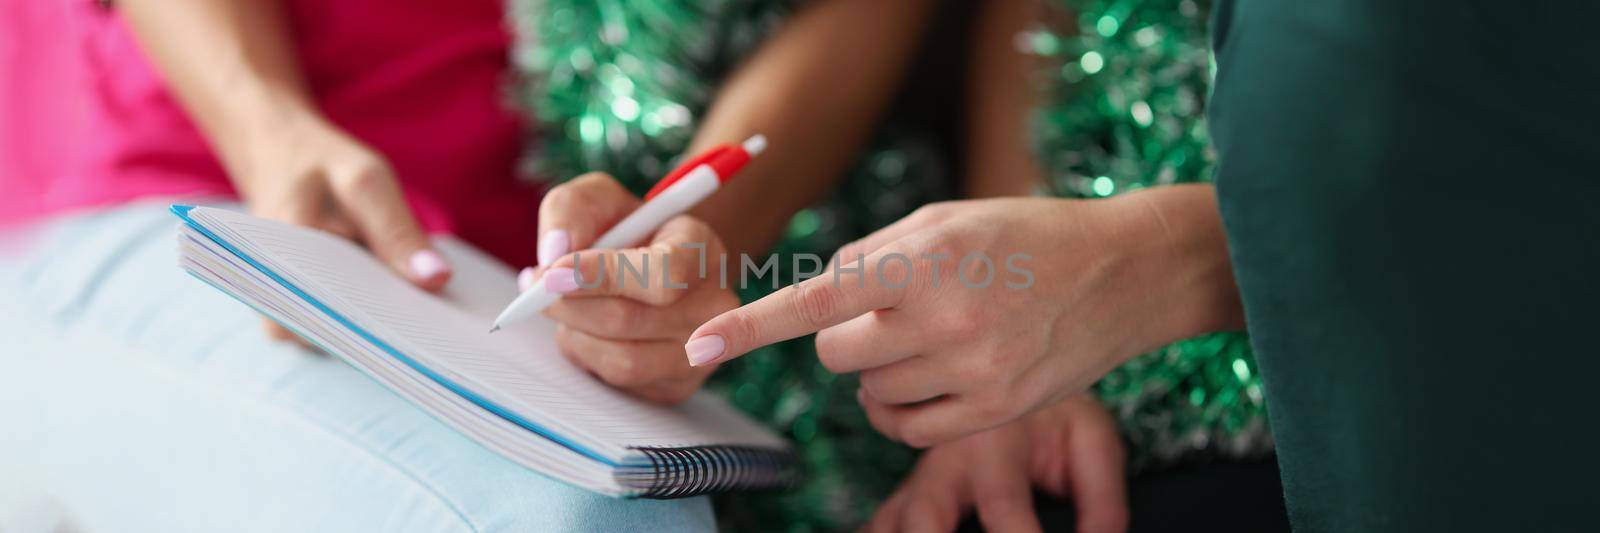 Close-up of women writing wish list for christmas, empty page to list desires for gifts. Creative atmosphere before new year, presents under christmas tree. Holiday concept. Blurred background